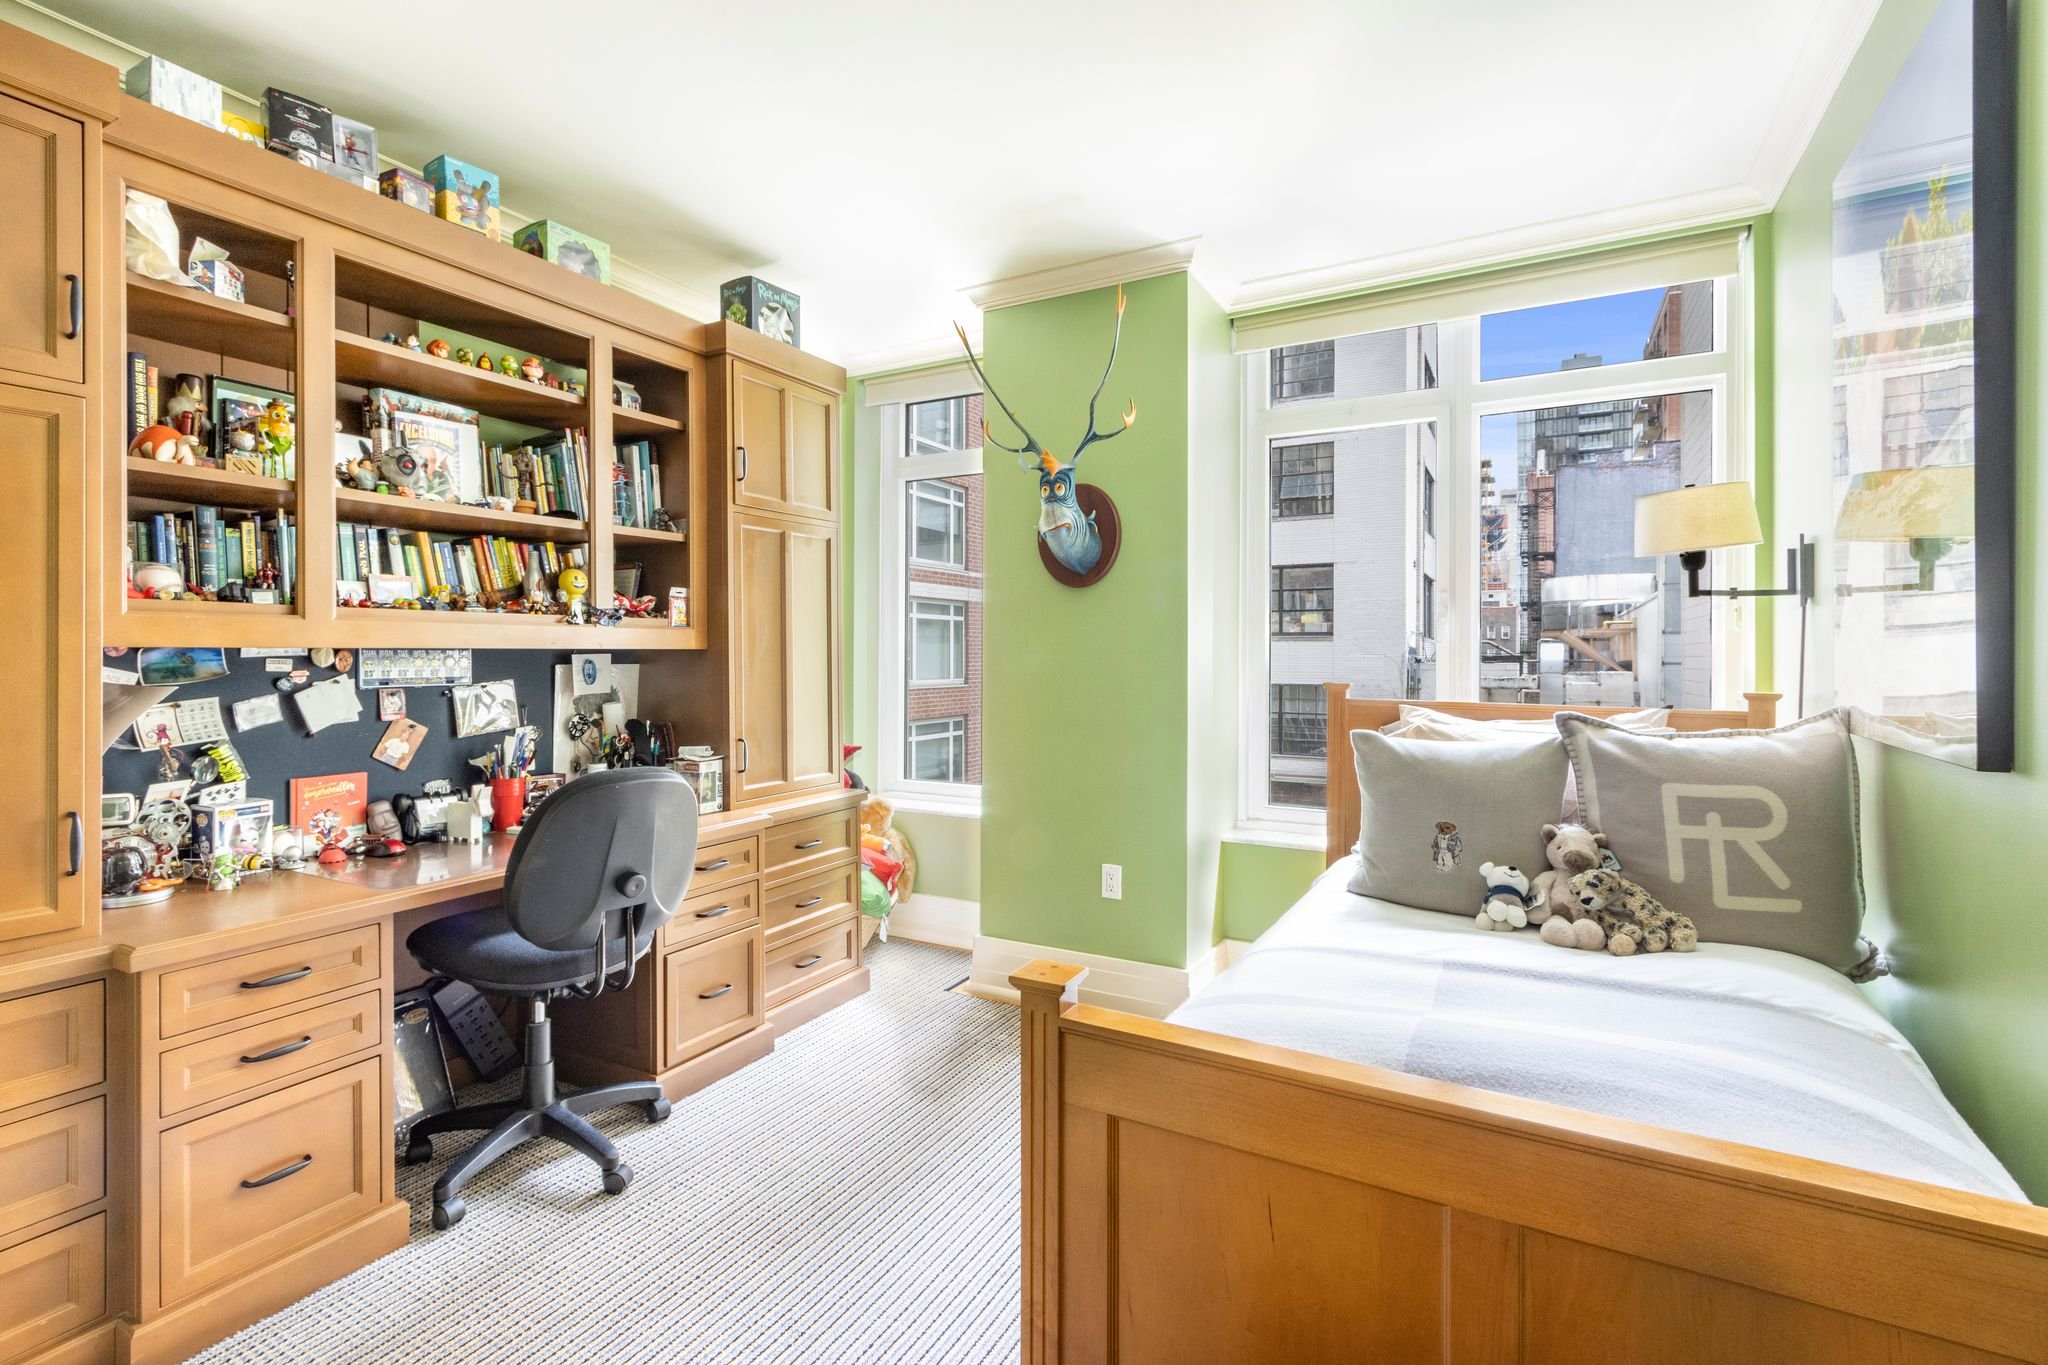  205 East 85th Street, Apartment 5MP